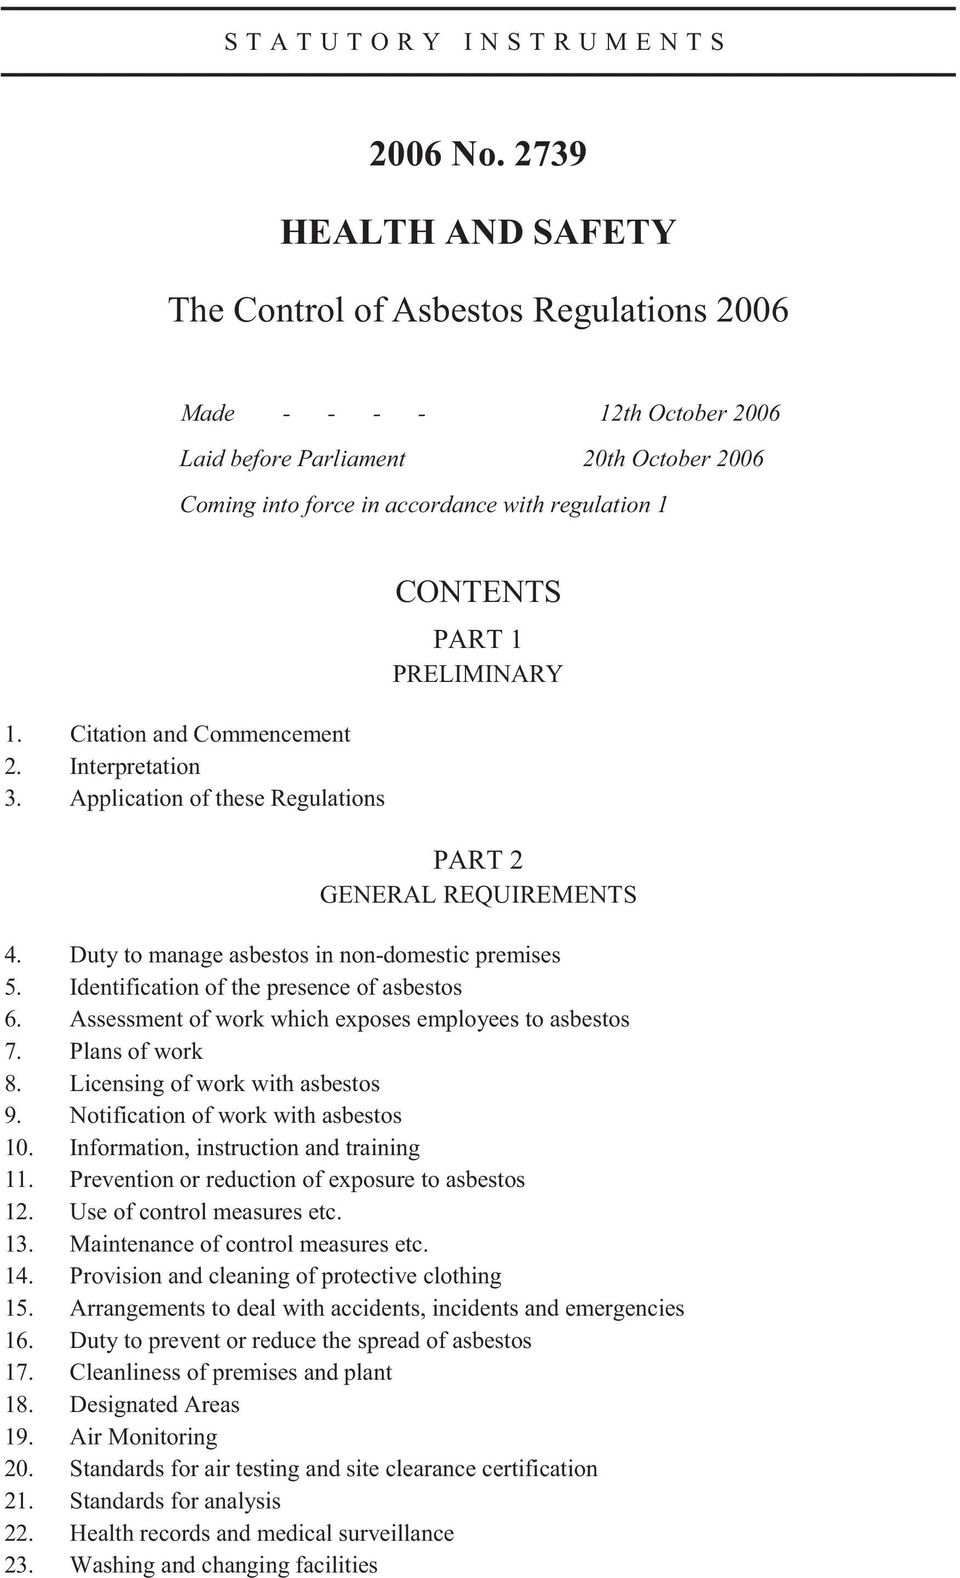 Citation and Commencement 2. Interpretation 3. Application of these Regulations CONTENTS PART 1 PRELIMINARY PART 2 GENERAL REQUIREMENTS 4. Duty to manage asbestos in non-domestic premises 5.